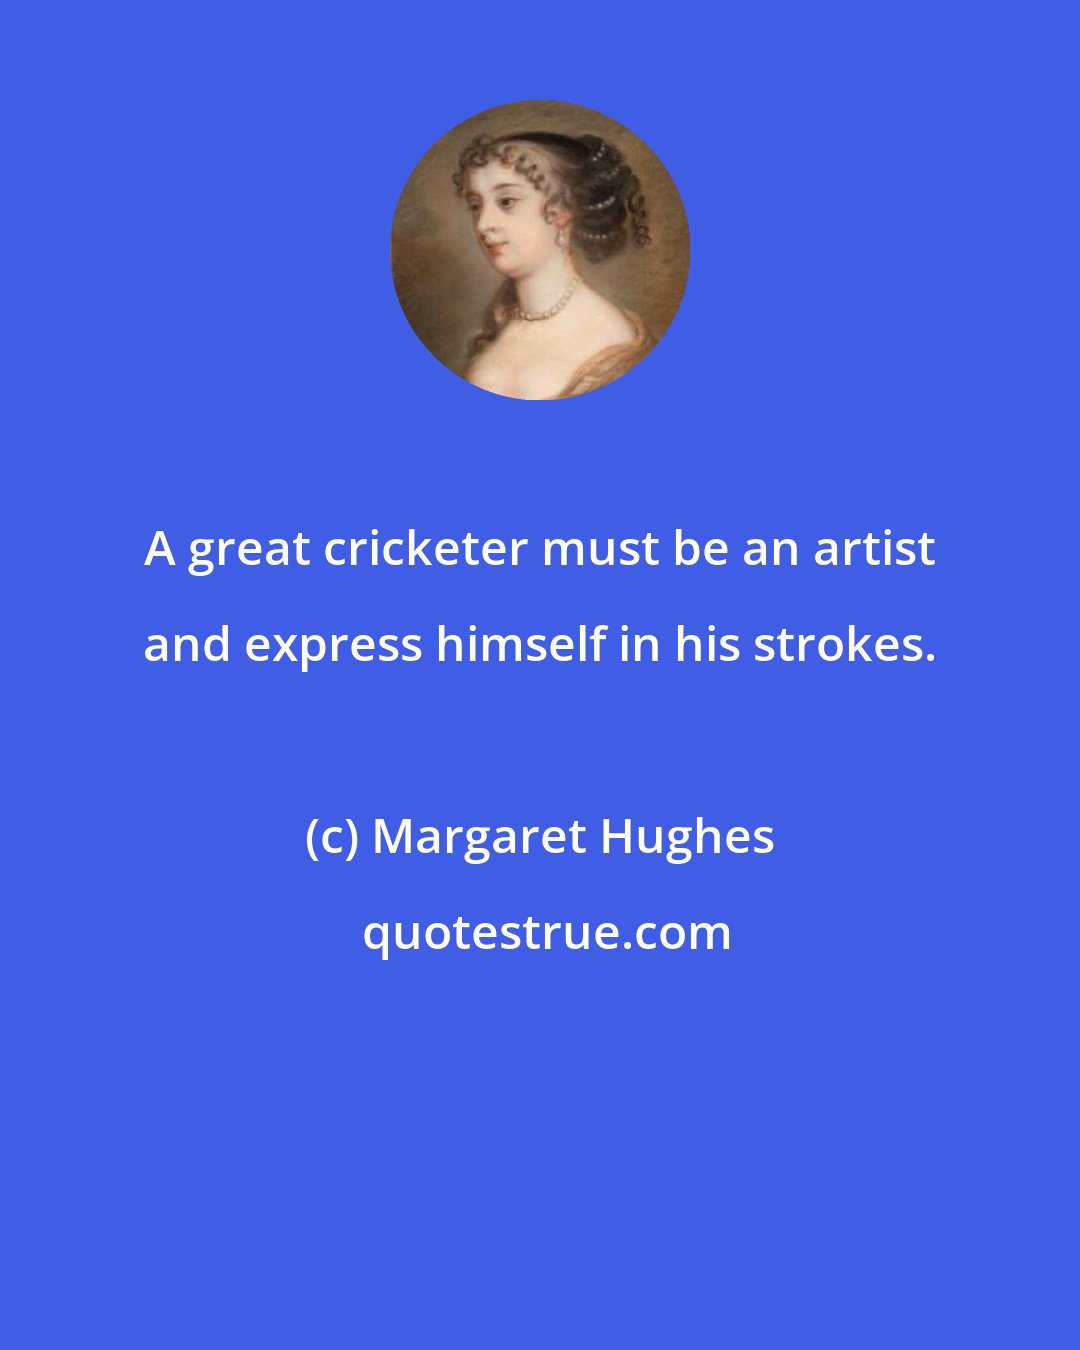 Margaret Hughes: A great cricketer must be an artist and express himself in his strokes.